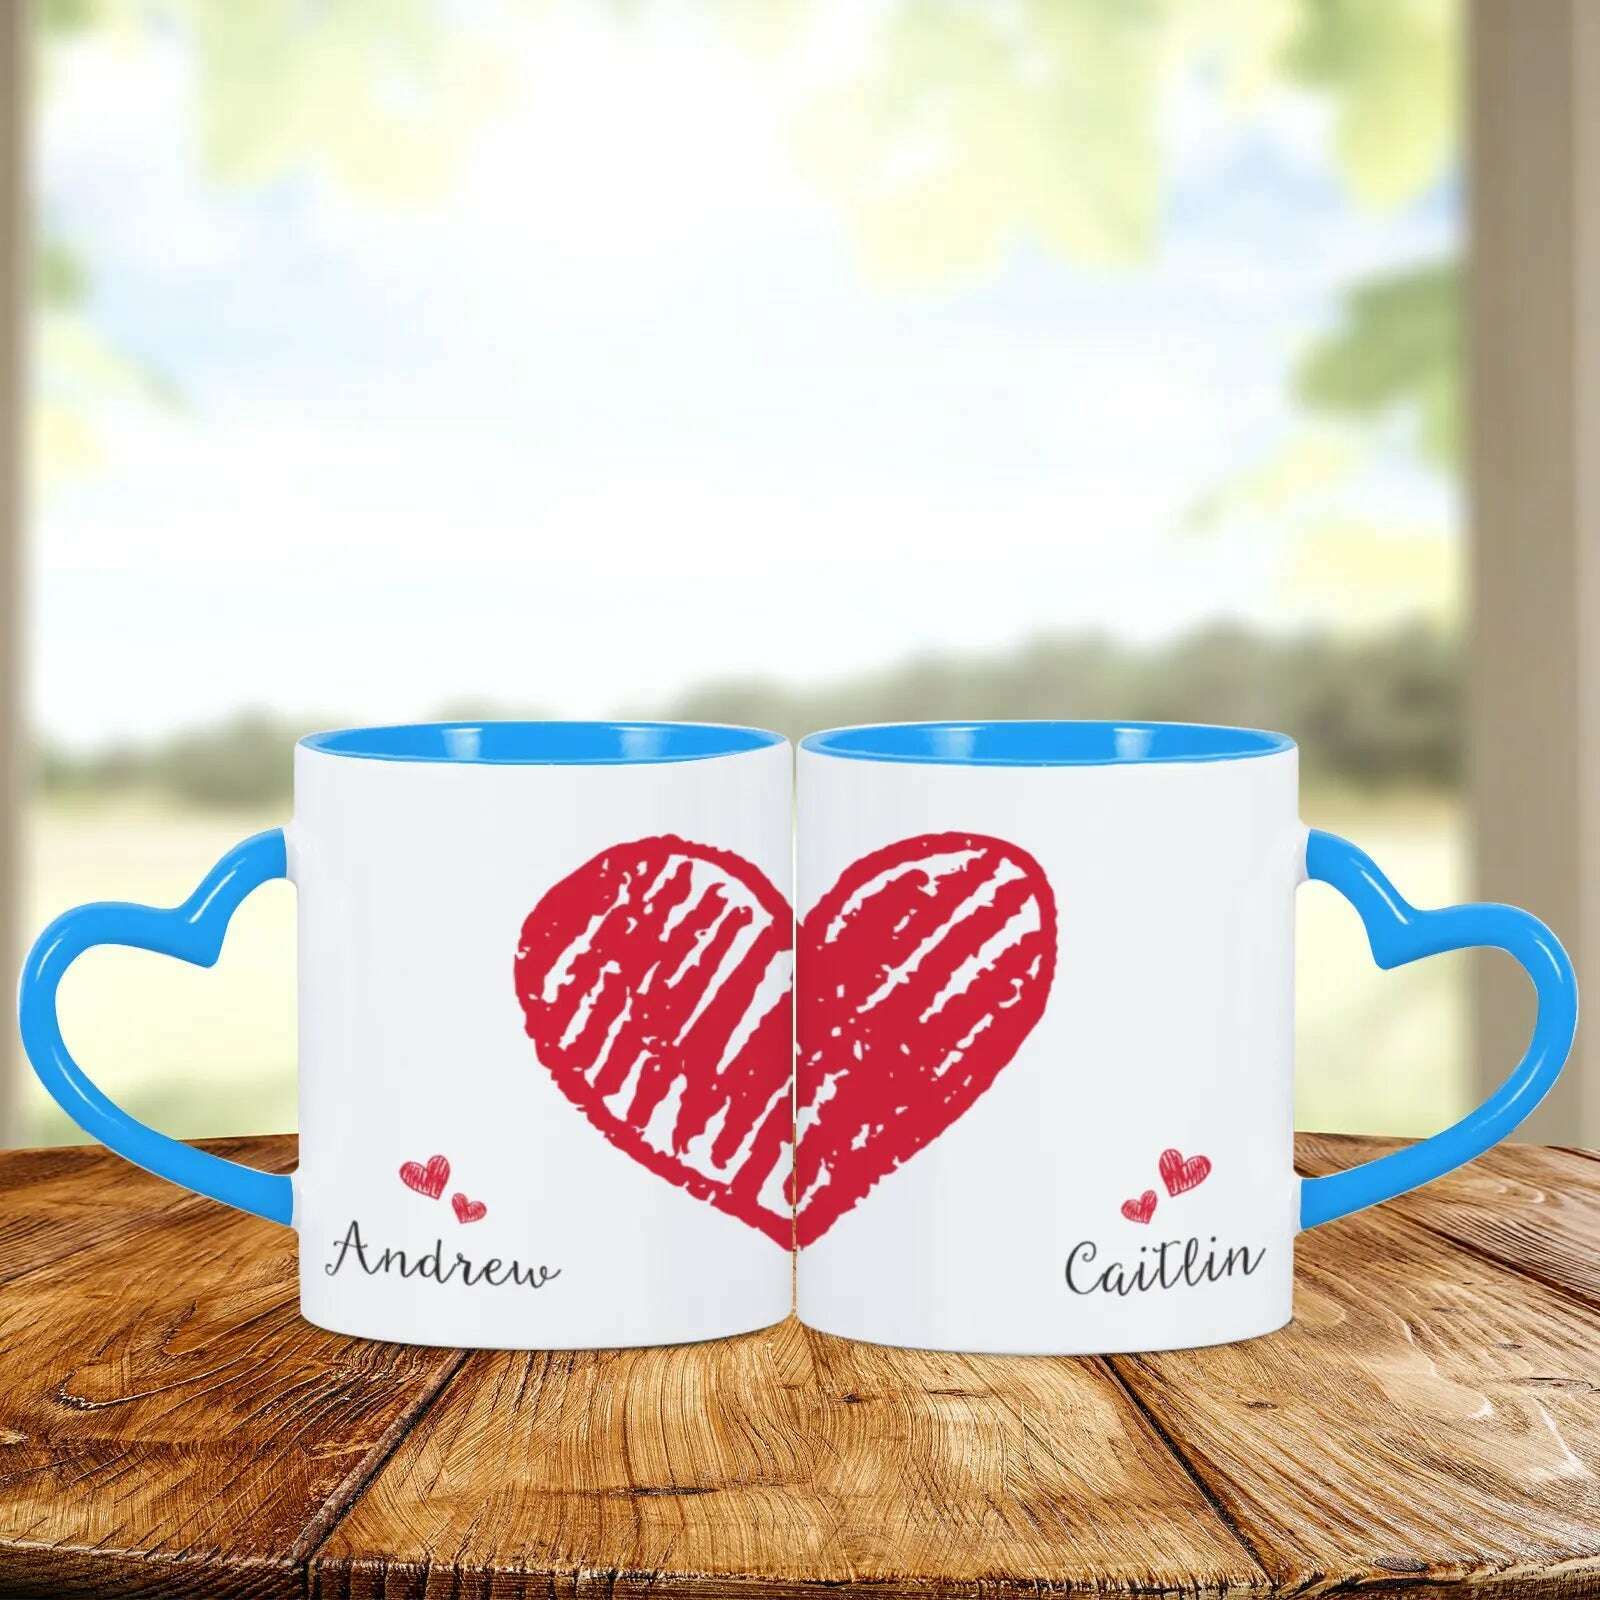 2pc Heart Handle Personalized Name Couple Coffee Mug for Girlfriend Wife Husband Valentine's Day present for Couples Coffee Mugs, Blue / 325ml, KIMLUD Women's Clothes